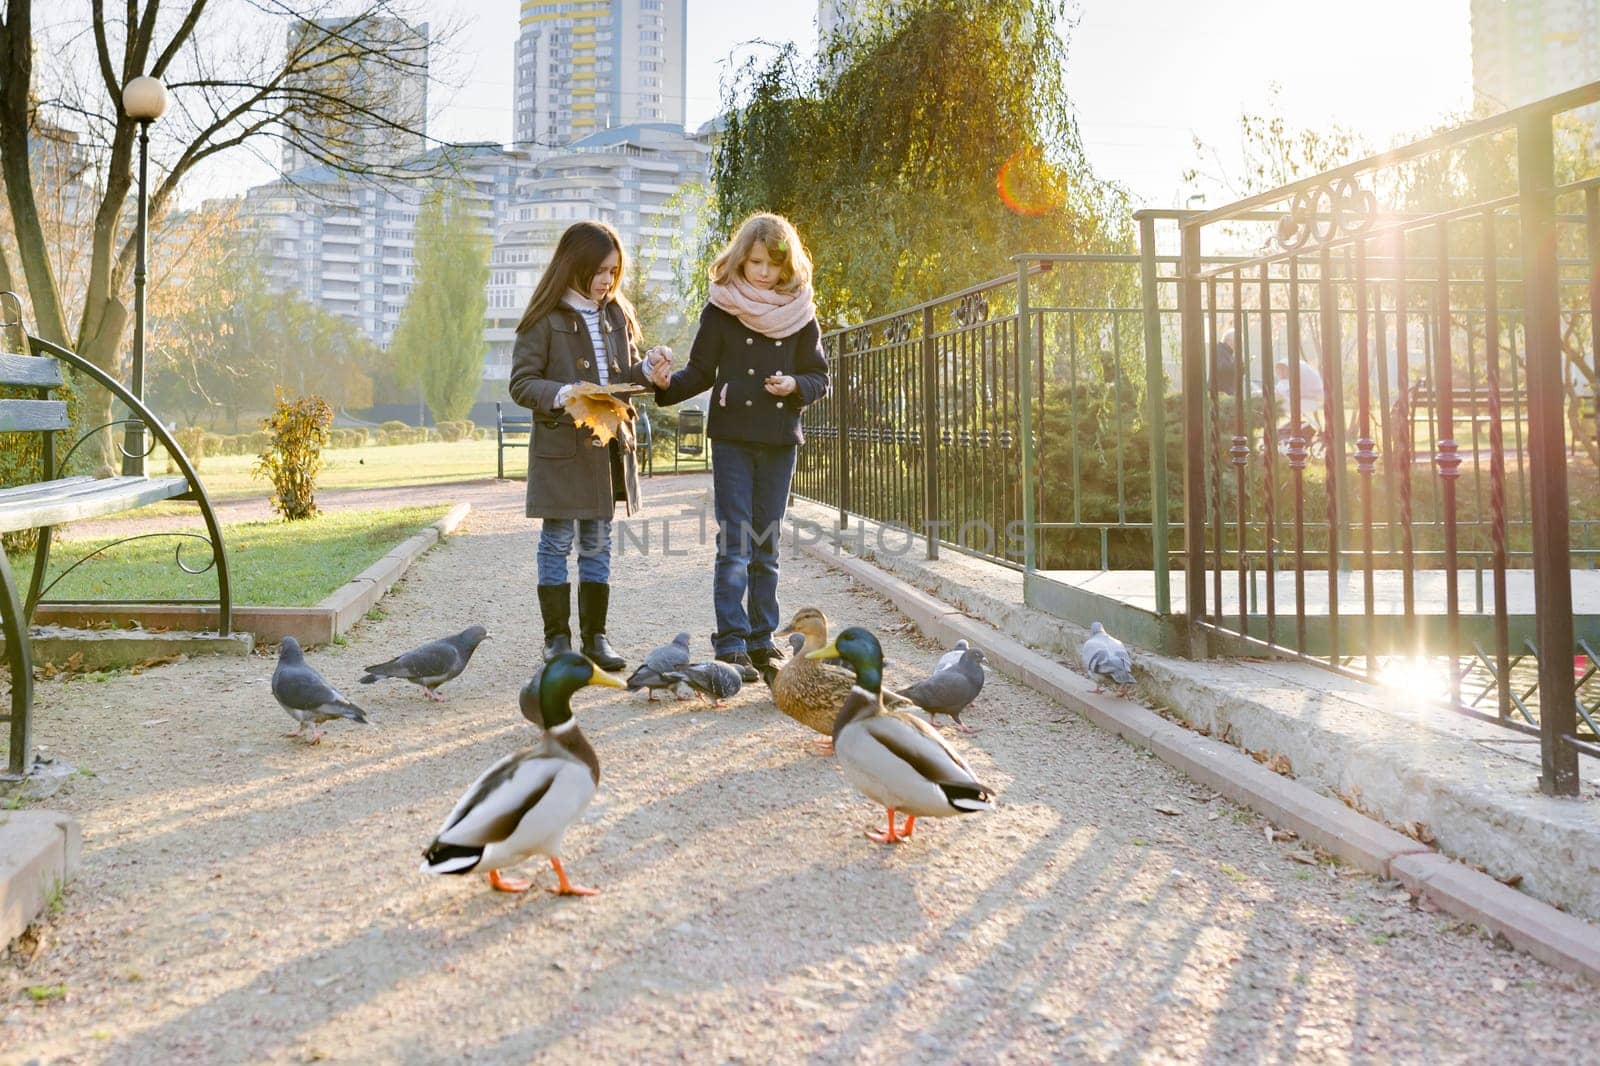 Two little girls feed birds ducks and pigeons in sunny autumn park, golden hour